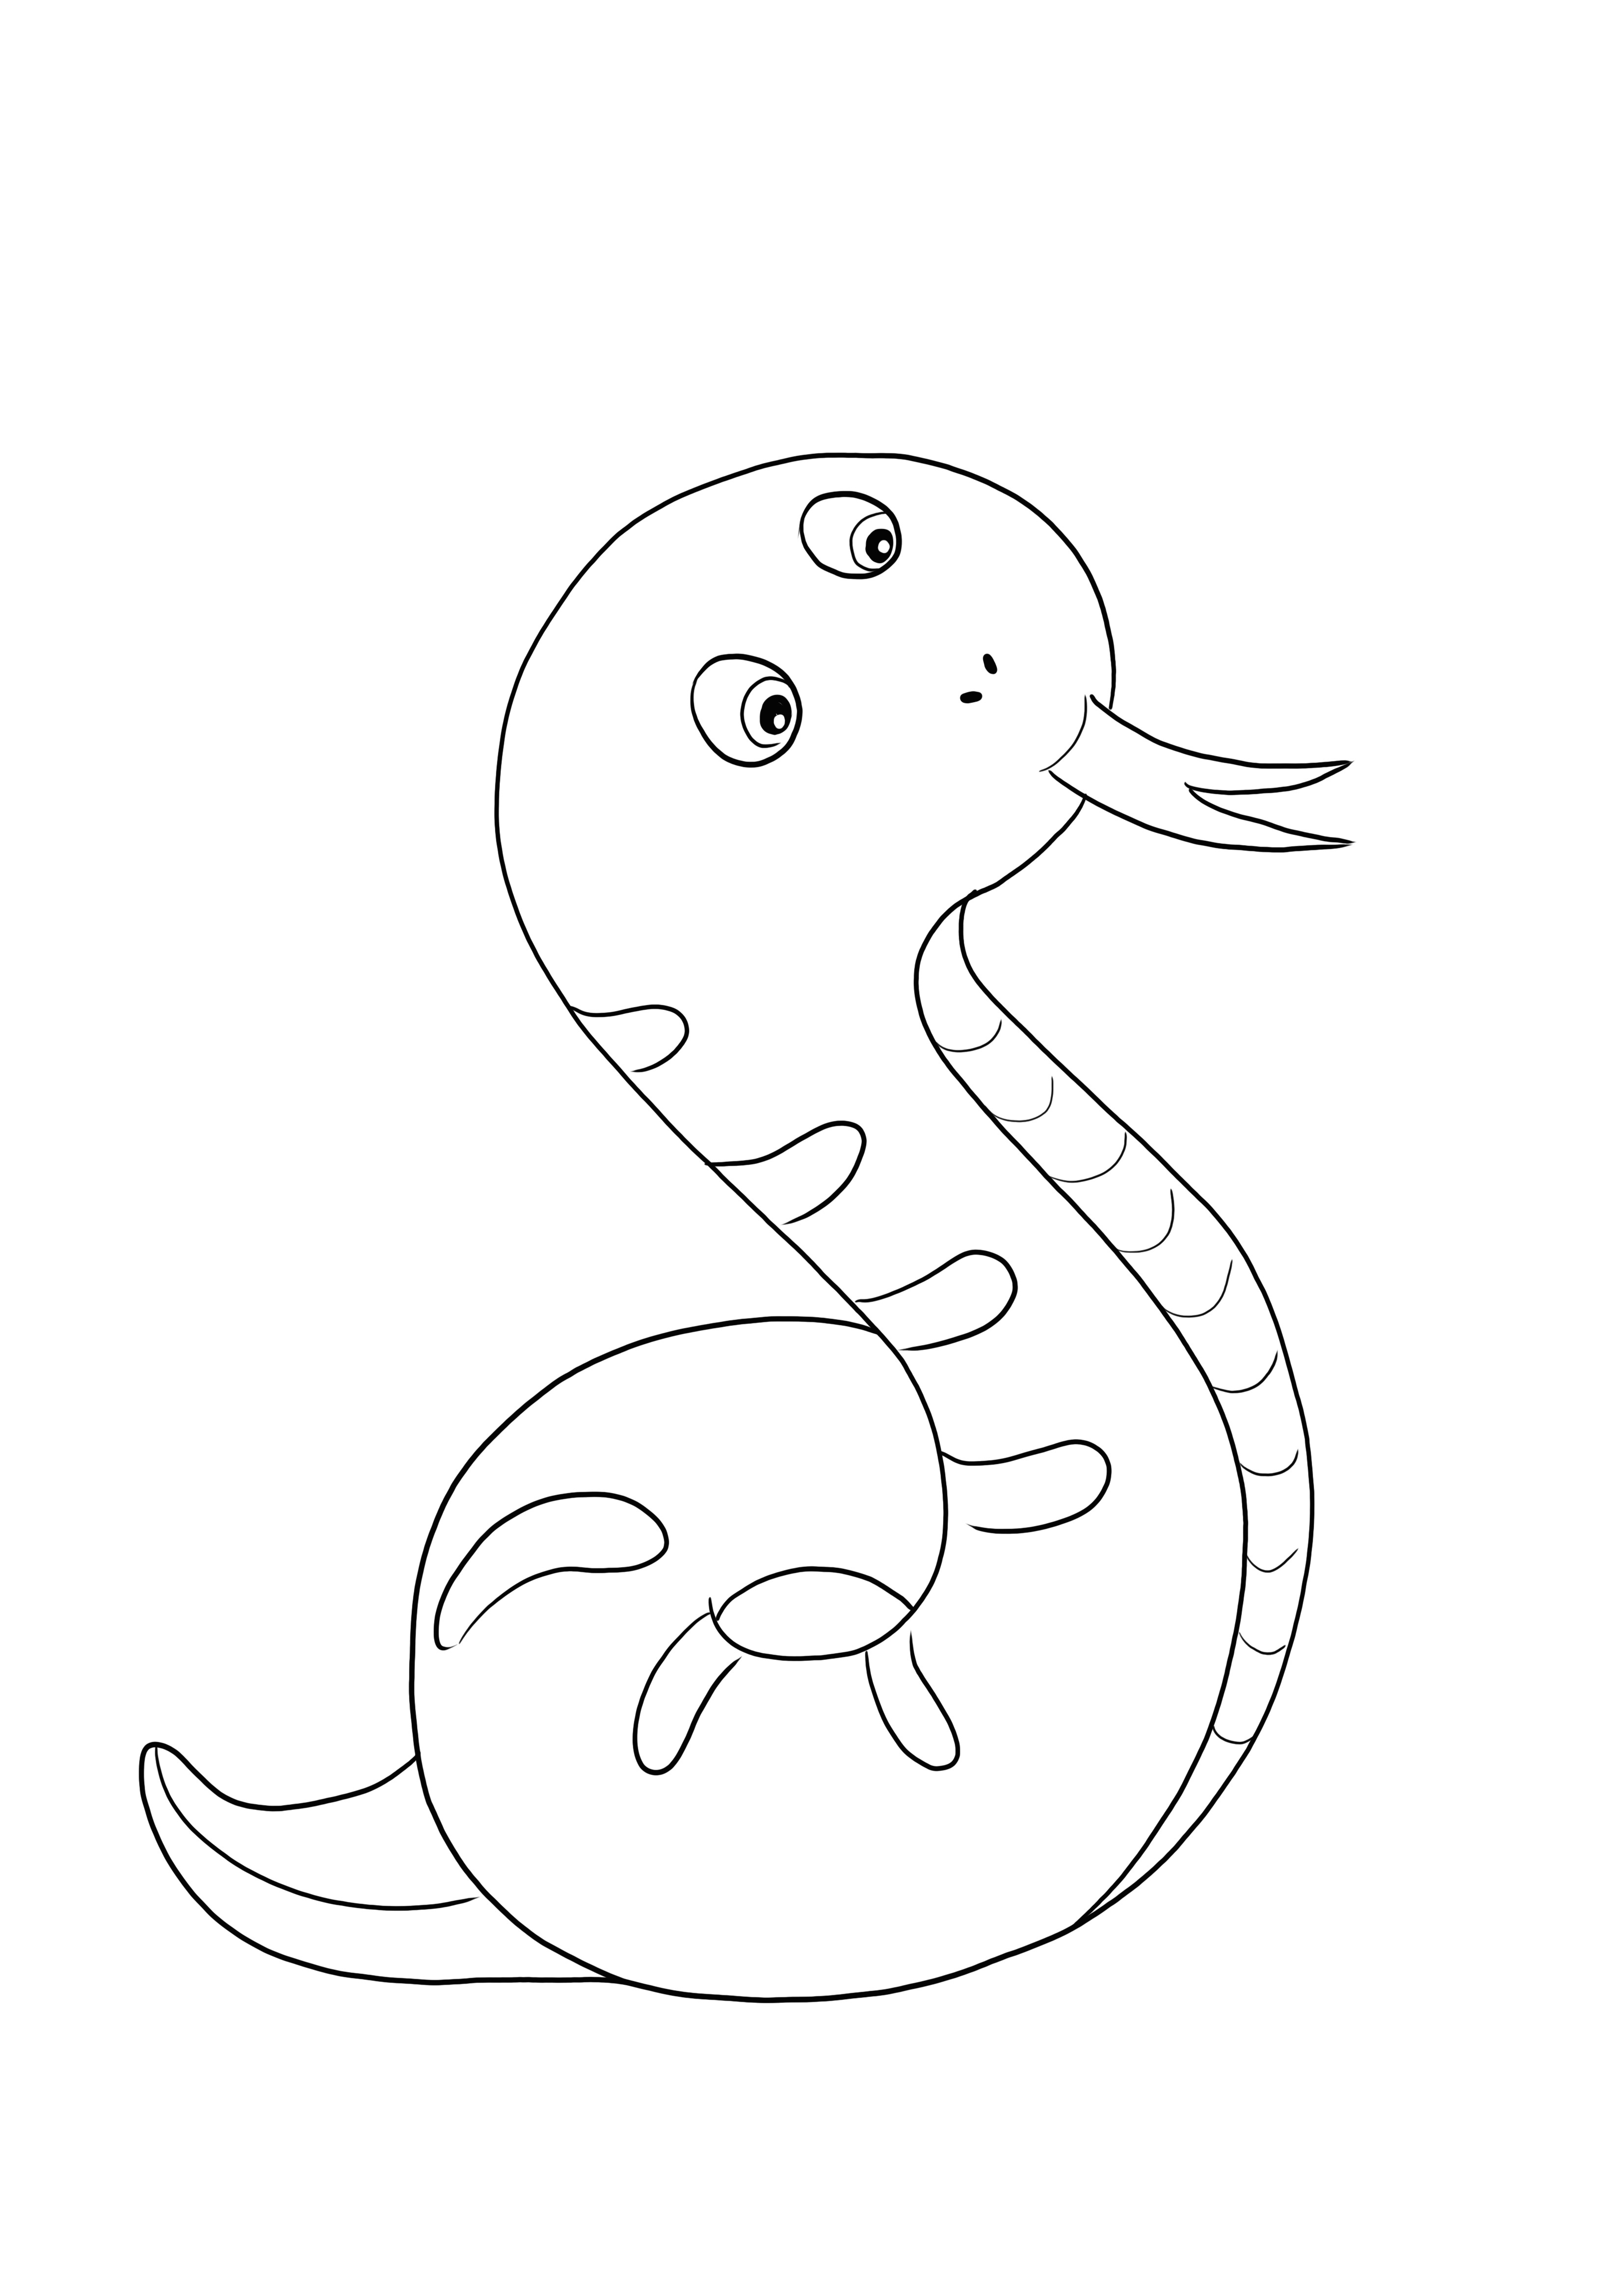 Snake Emoji to print and color for free image for all kids